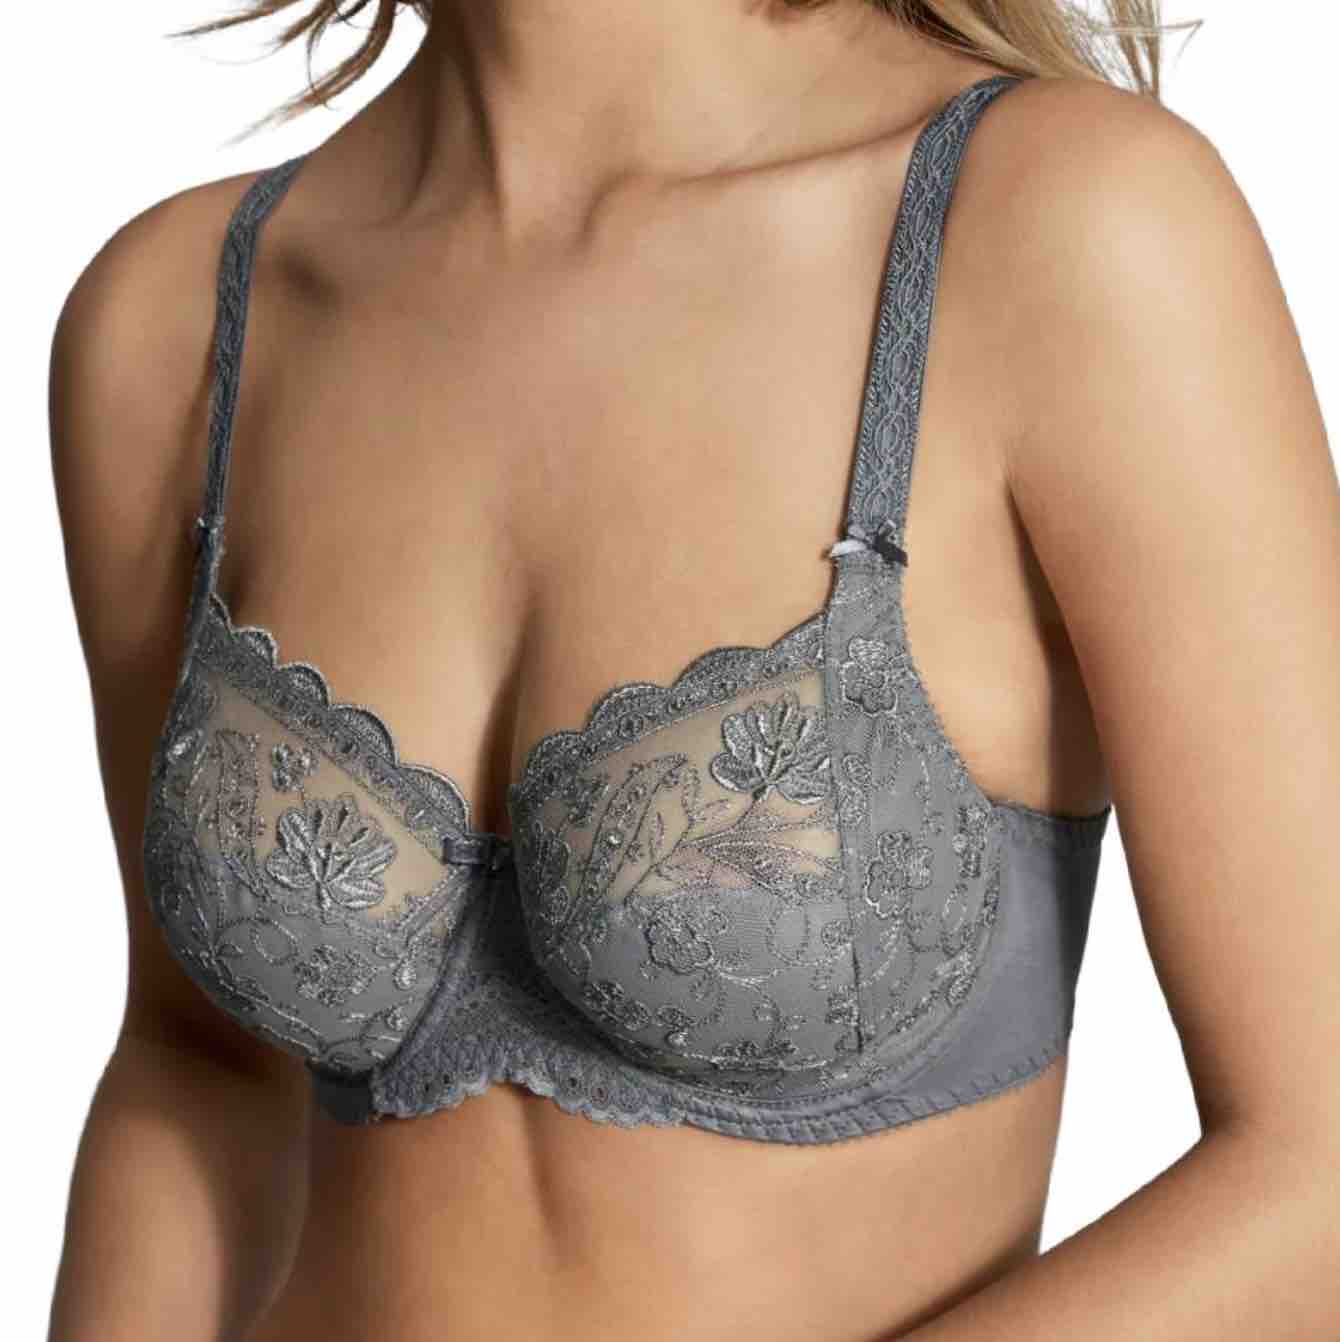 Storm in A-G Cup :: Bra Fitting & Troubleshooting Guide :: Bras